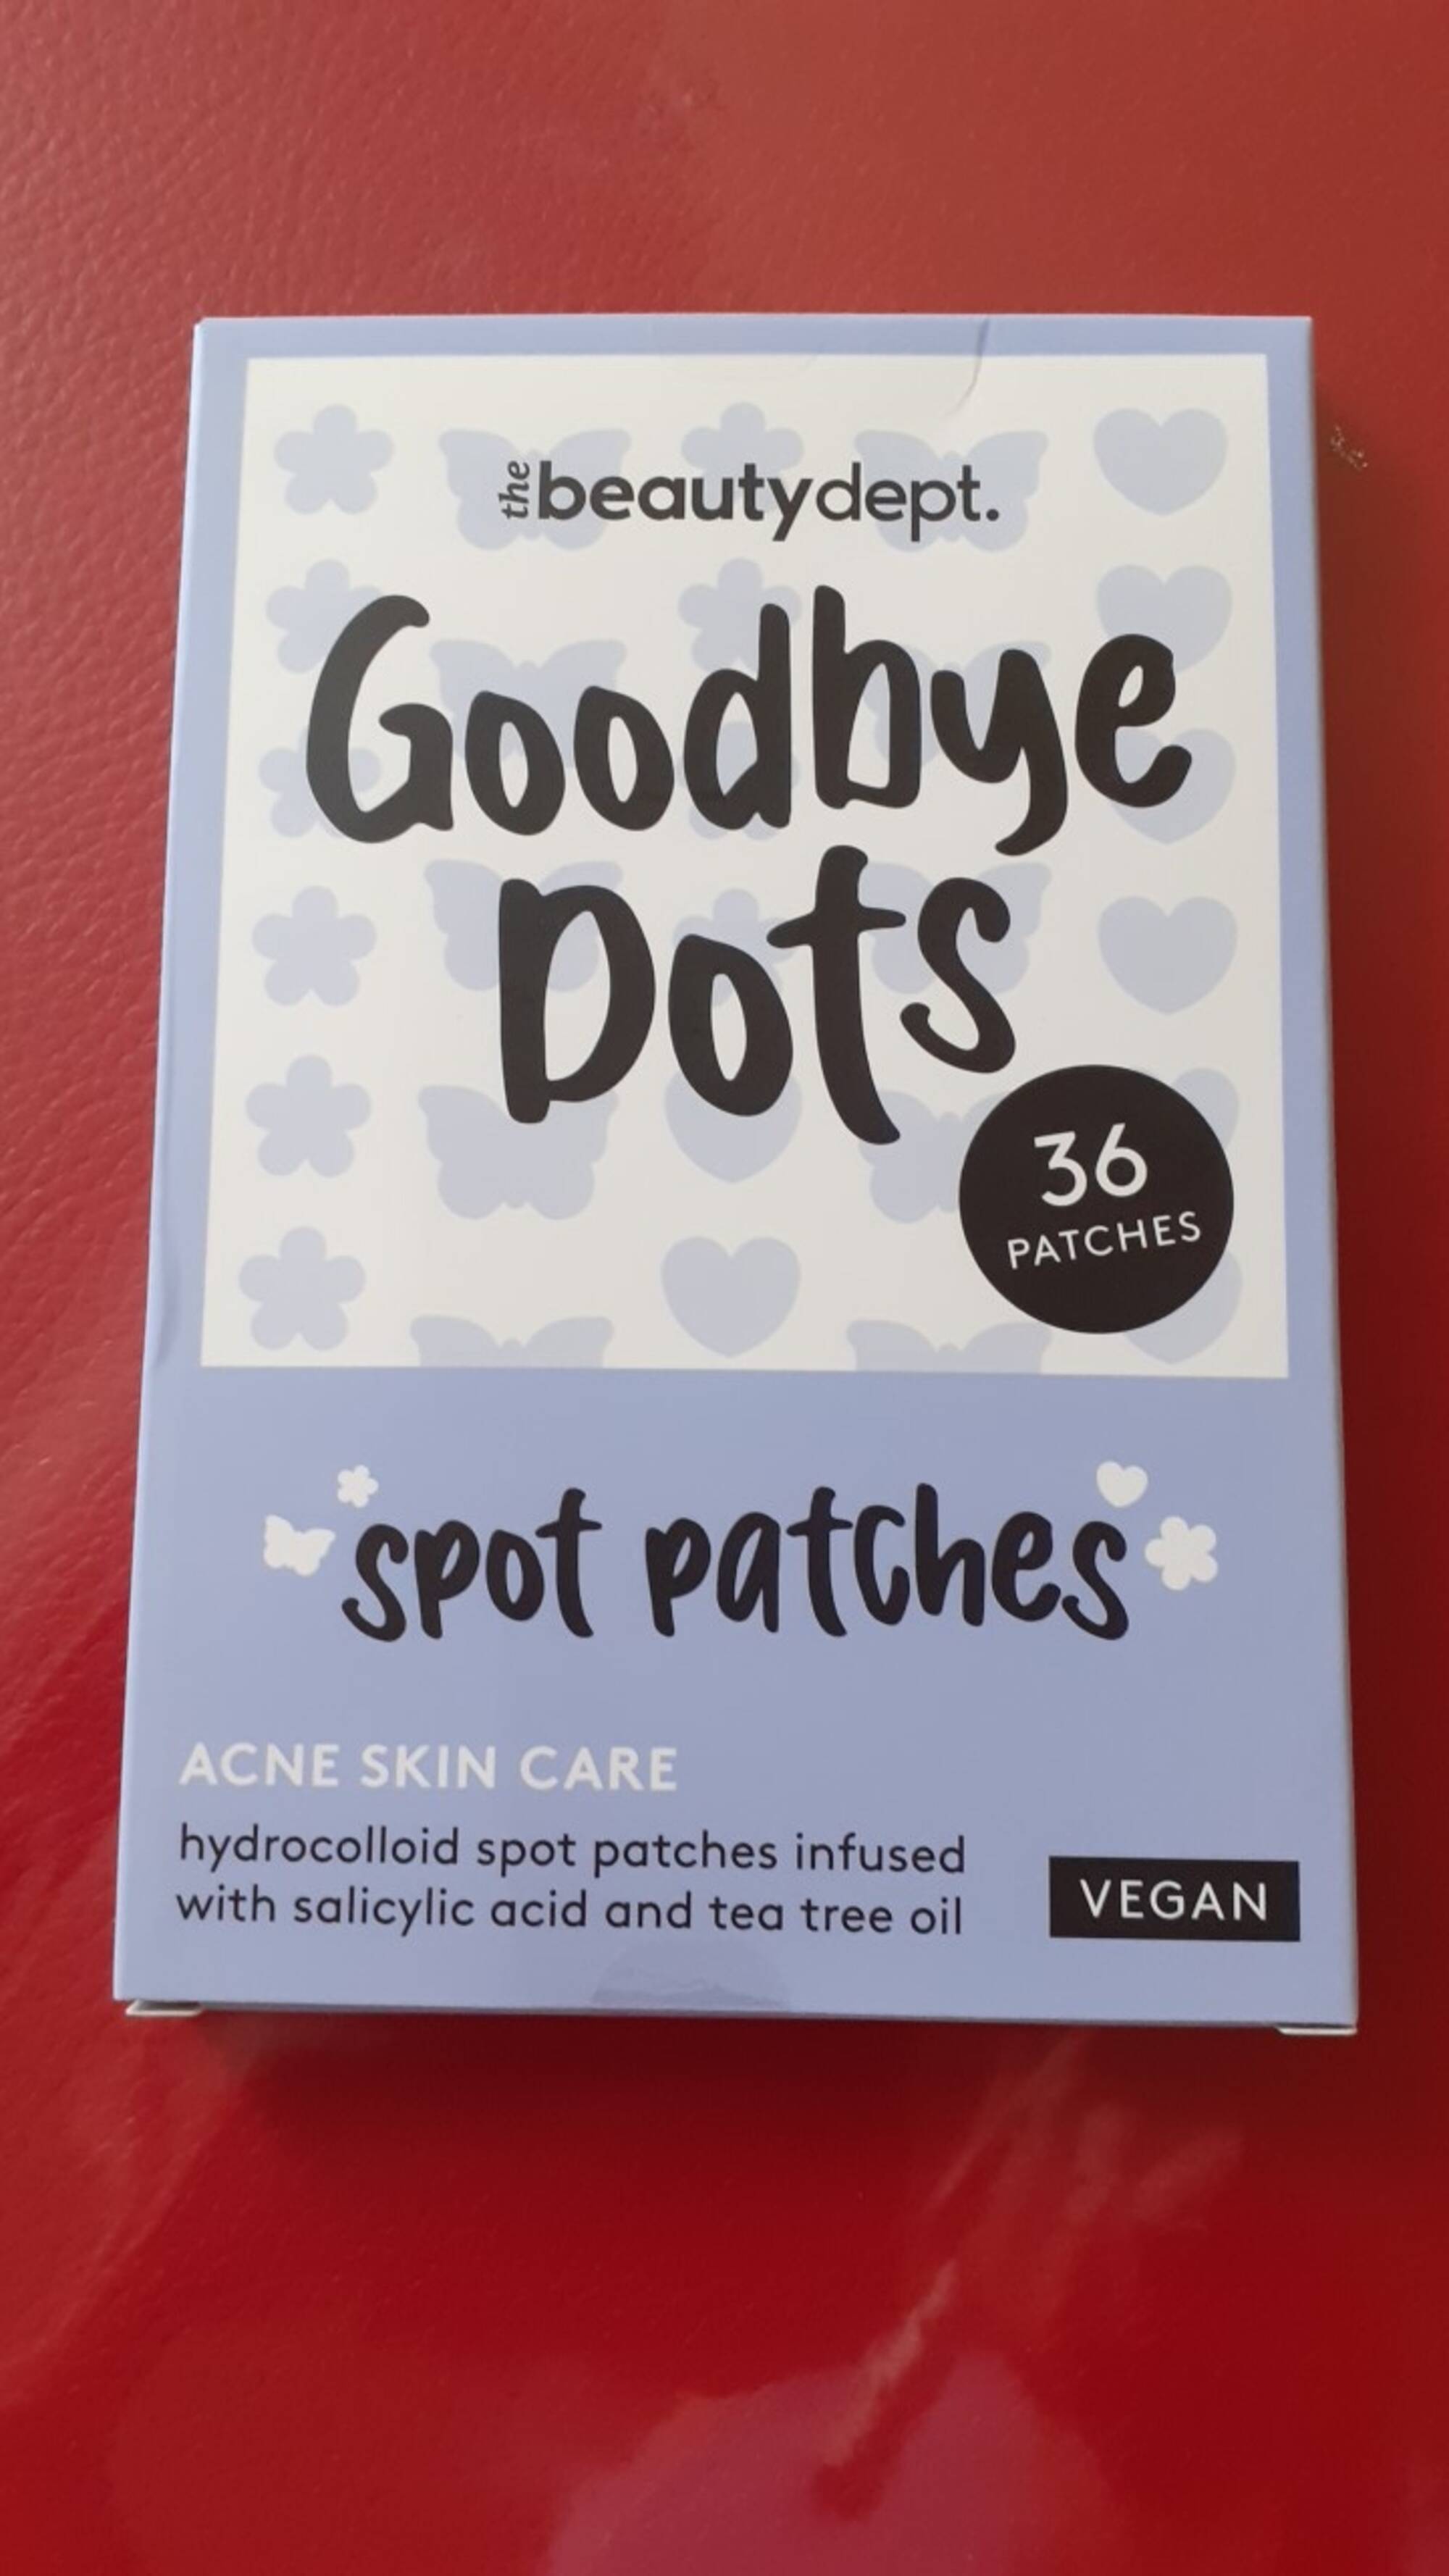 THE BEAUTY DEPT - Goodbye dots - Spot patches